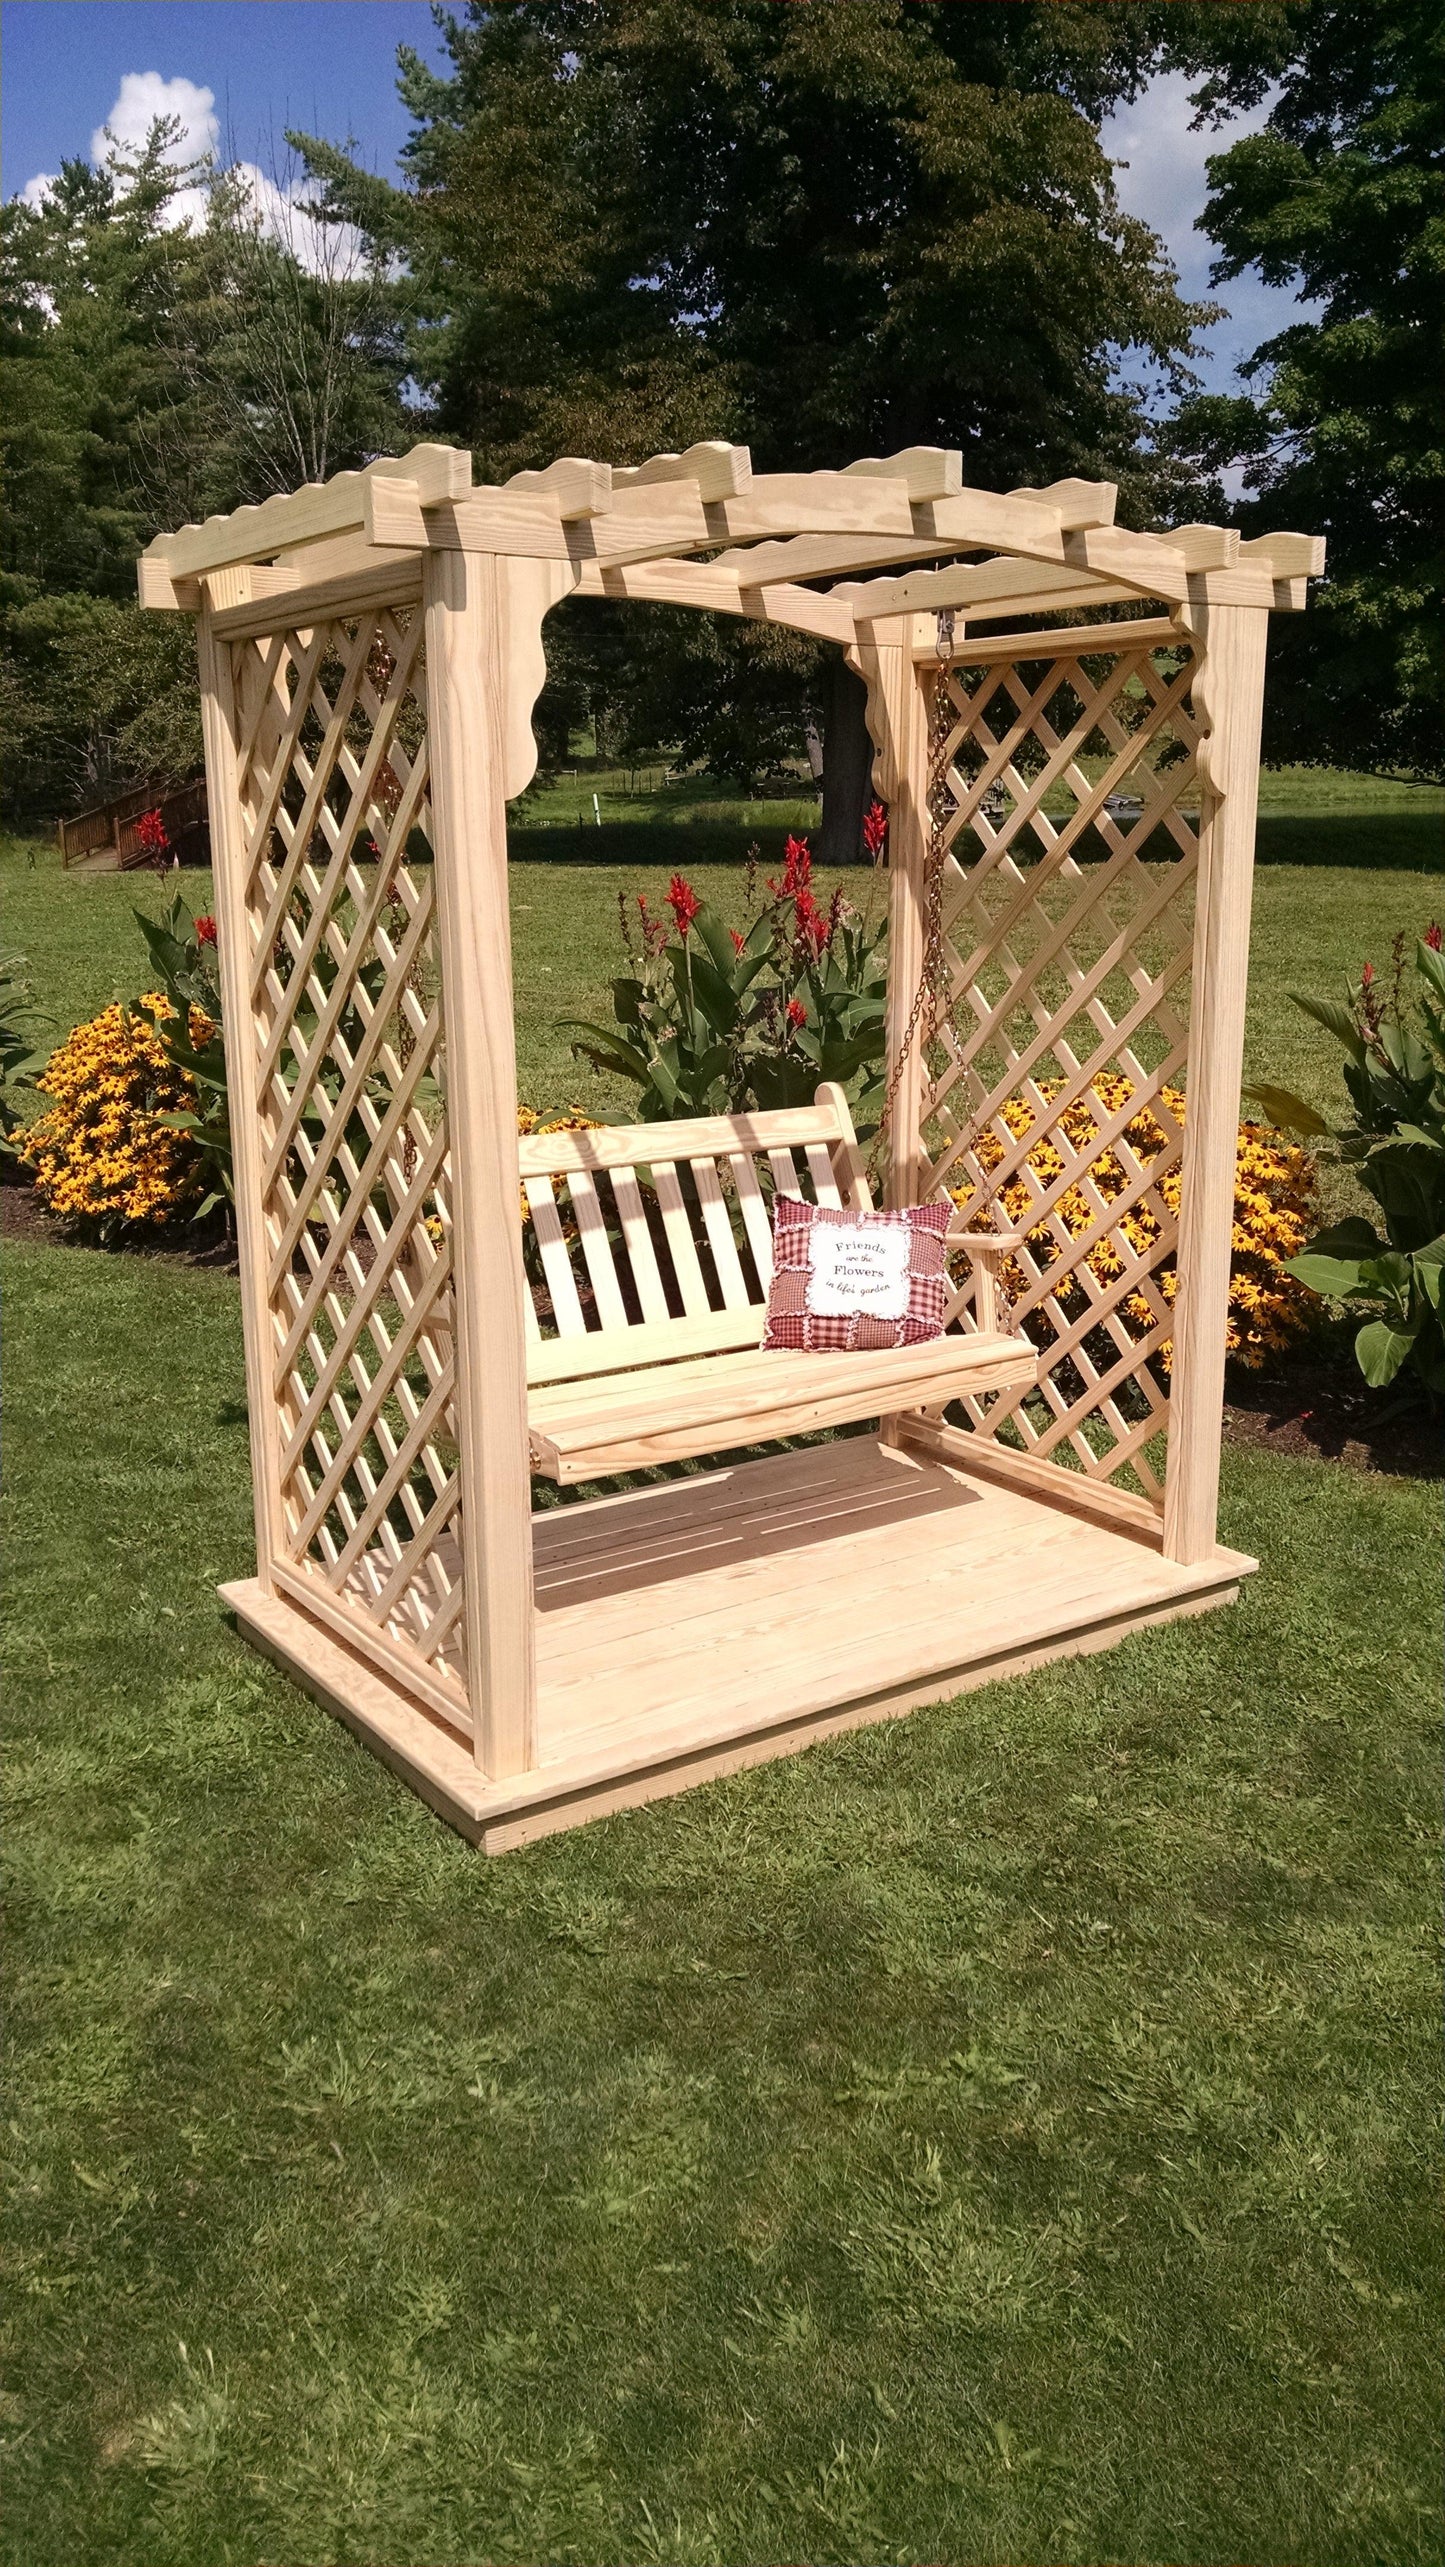 A&L FURNITURE CO. 6' Jamesport Pressure Treated Pine Arbor w/ Deck & Swing - LEAD TIME TO SHIP 10 BUSINESS DAYS